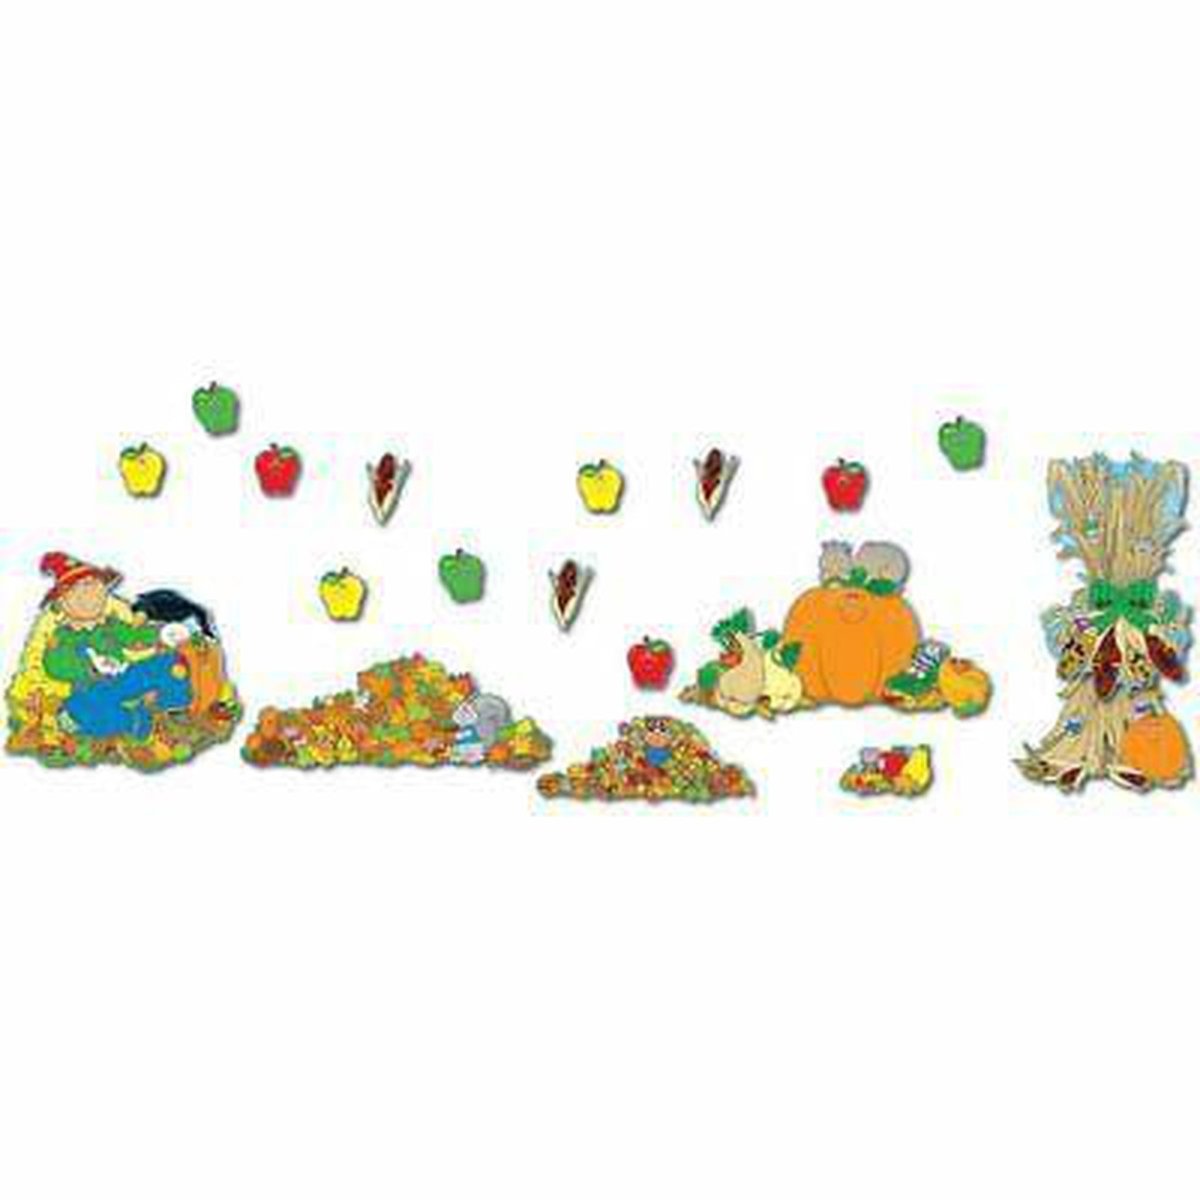 Large Fall Accents Bulletin Board Set - Kids Party Craft